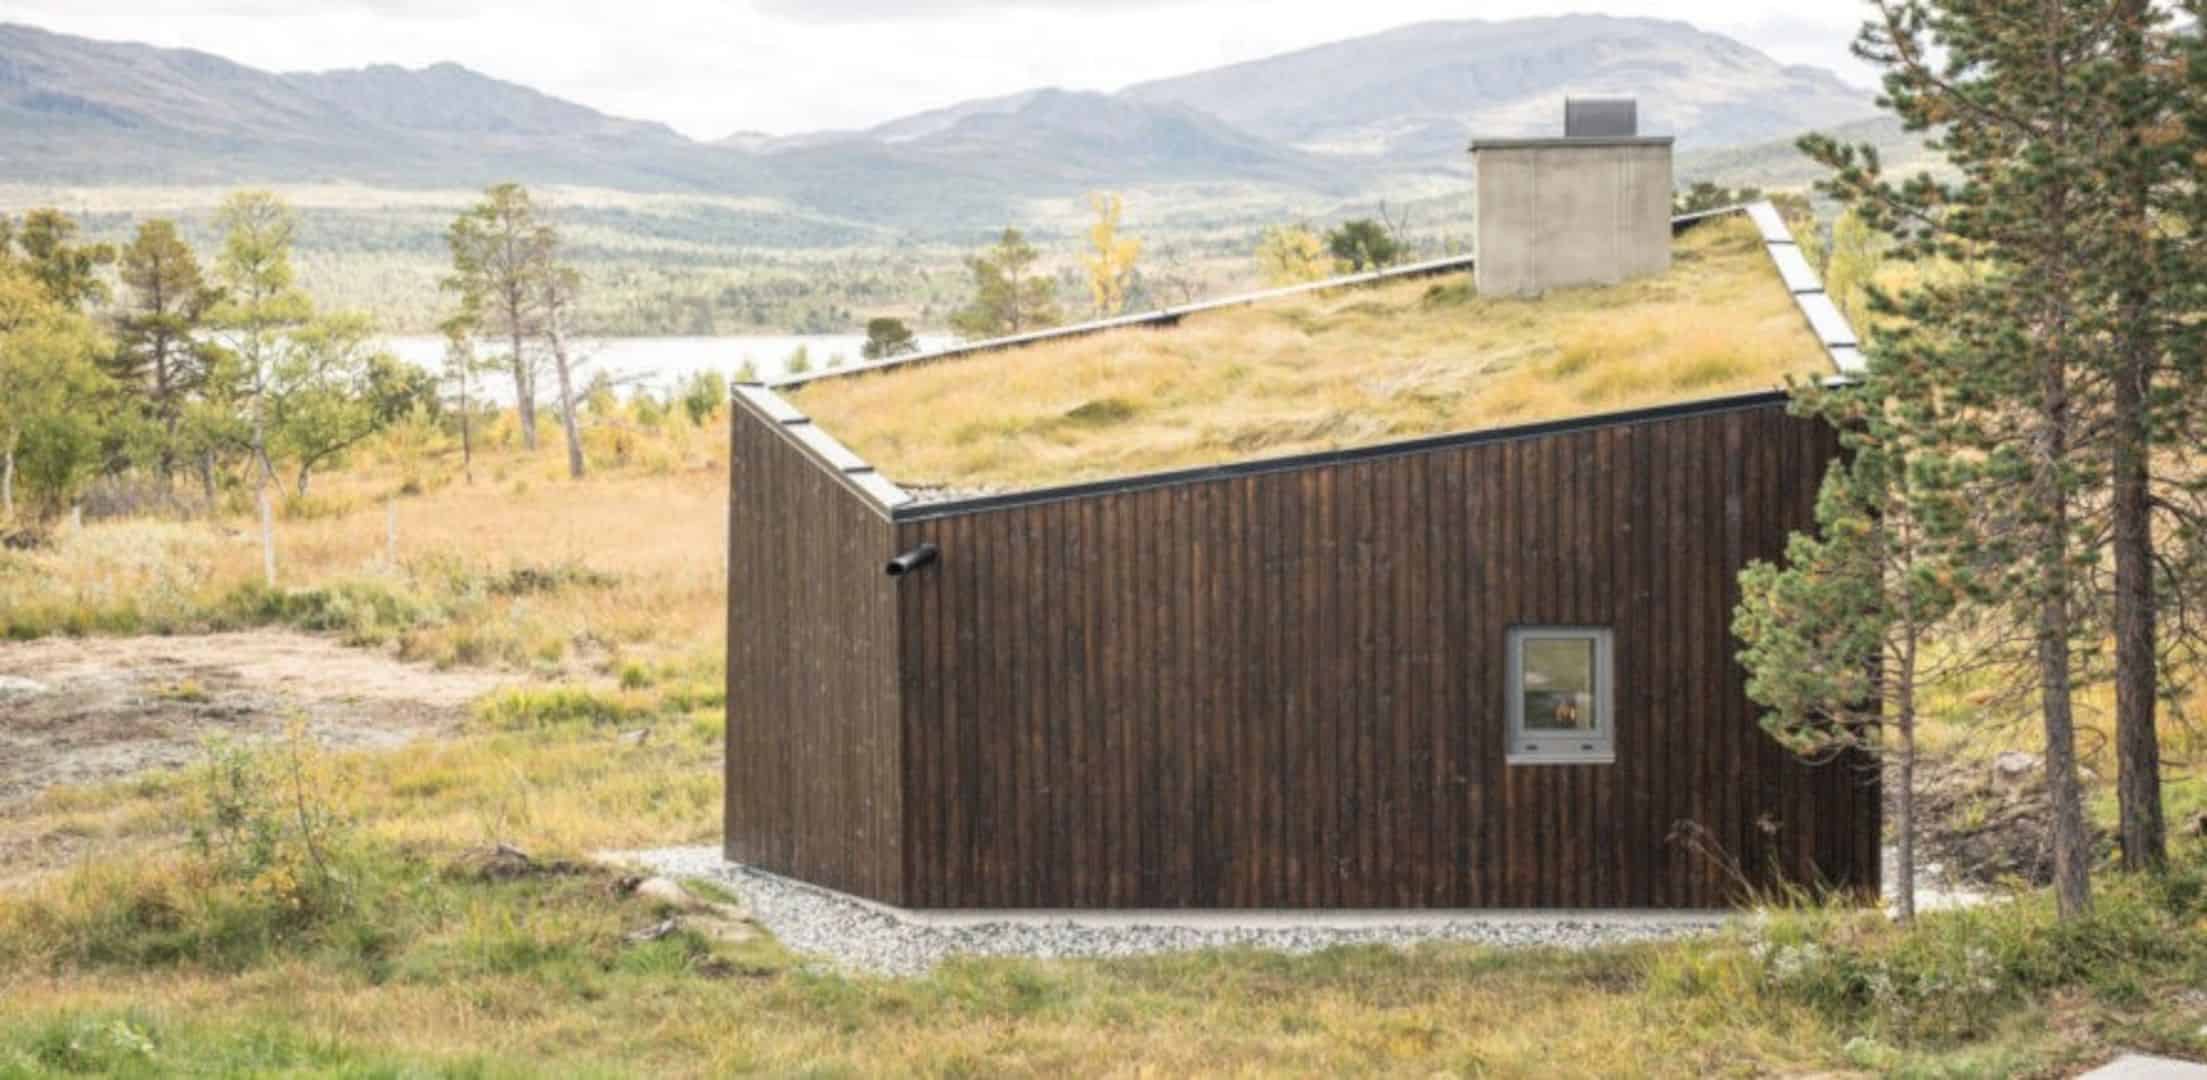 viewpoint granasjøen: a modern look for the traditional